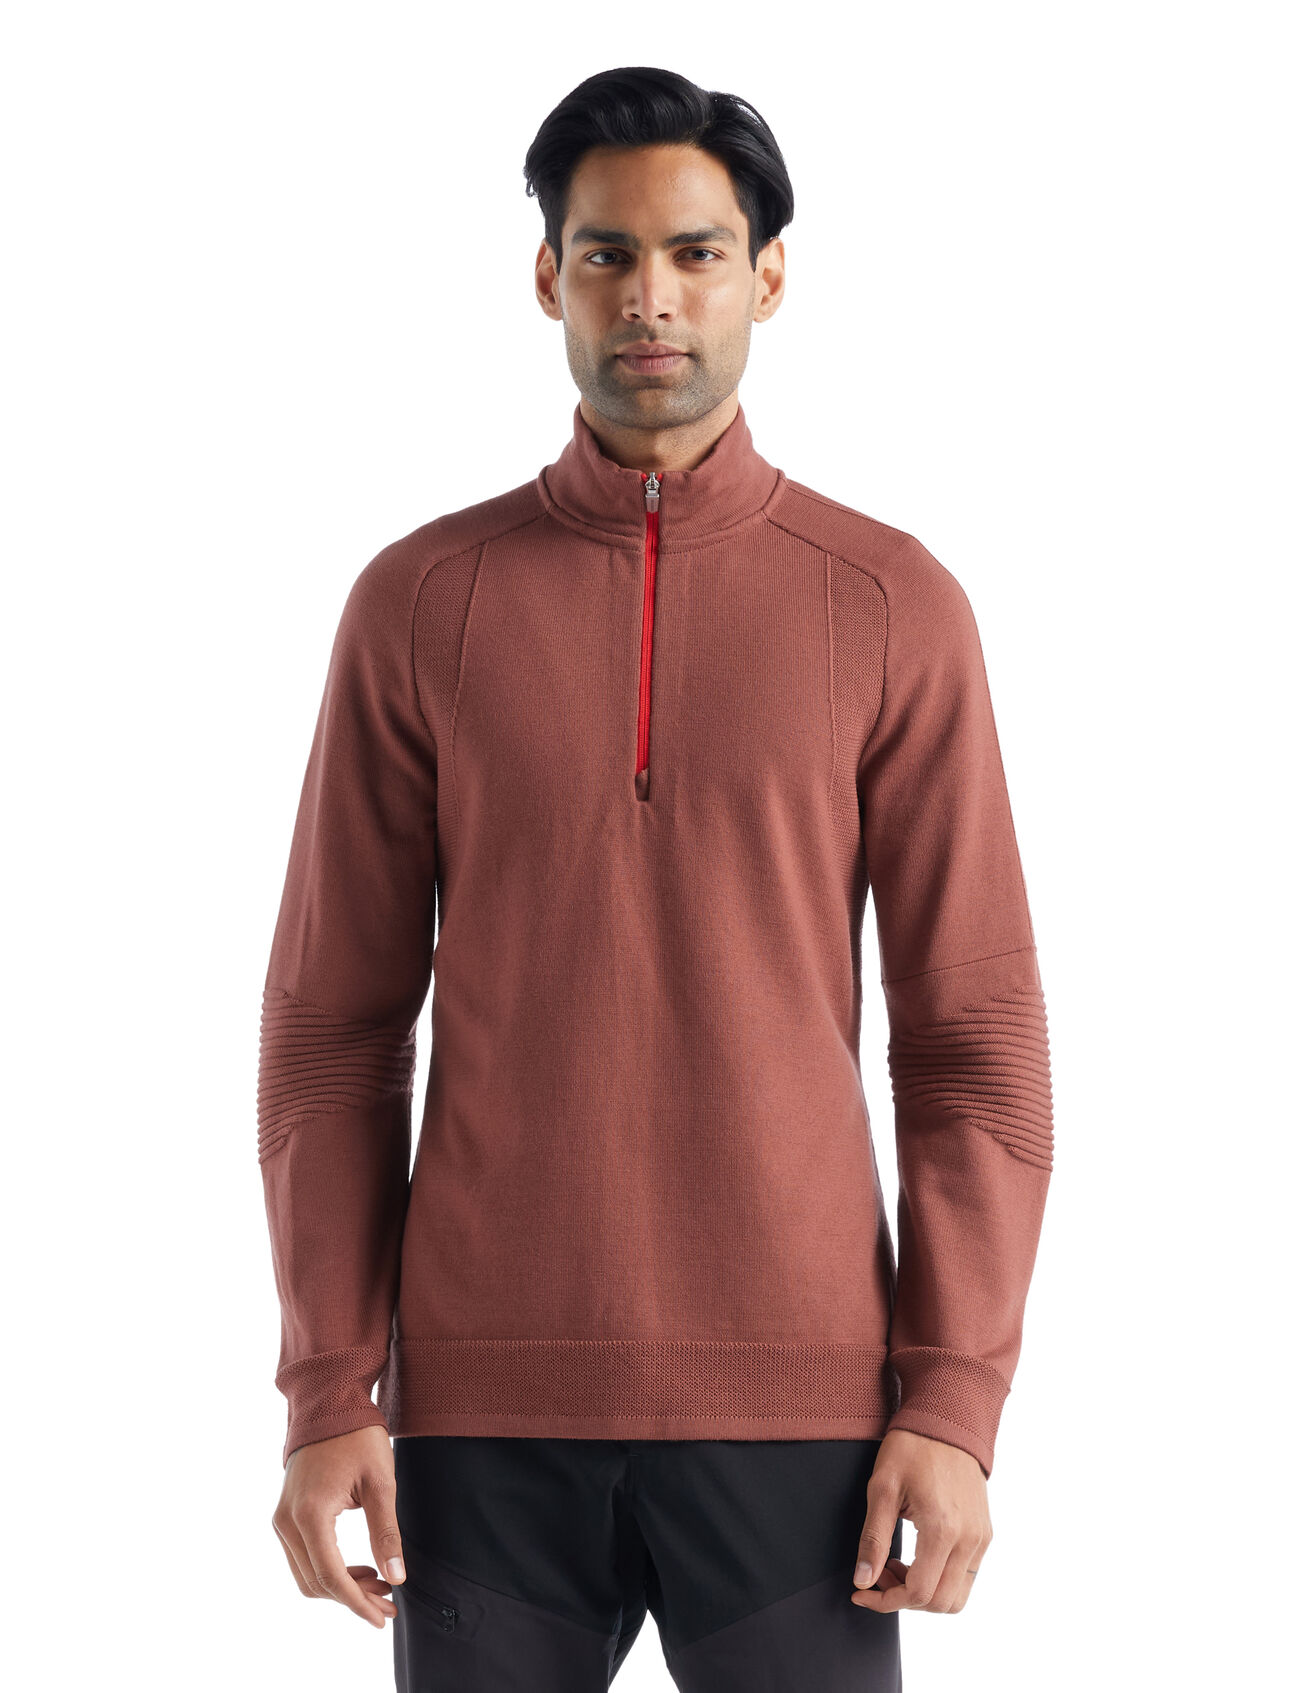 Mens ZoneKnit™ Merino Long Sleeve Half Zip A versatile, body-mapped zip-neck top that’s ideal for high-output mountain adventures, the ZoneKnit™Long Sleeve Half Zip features 100% merino wool for all-natural warmth and temperature regulation.